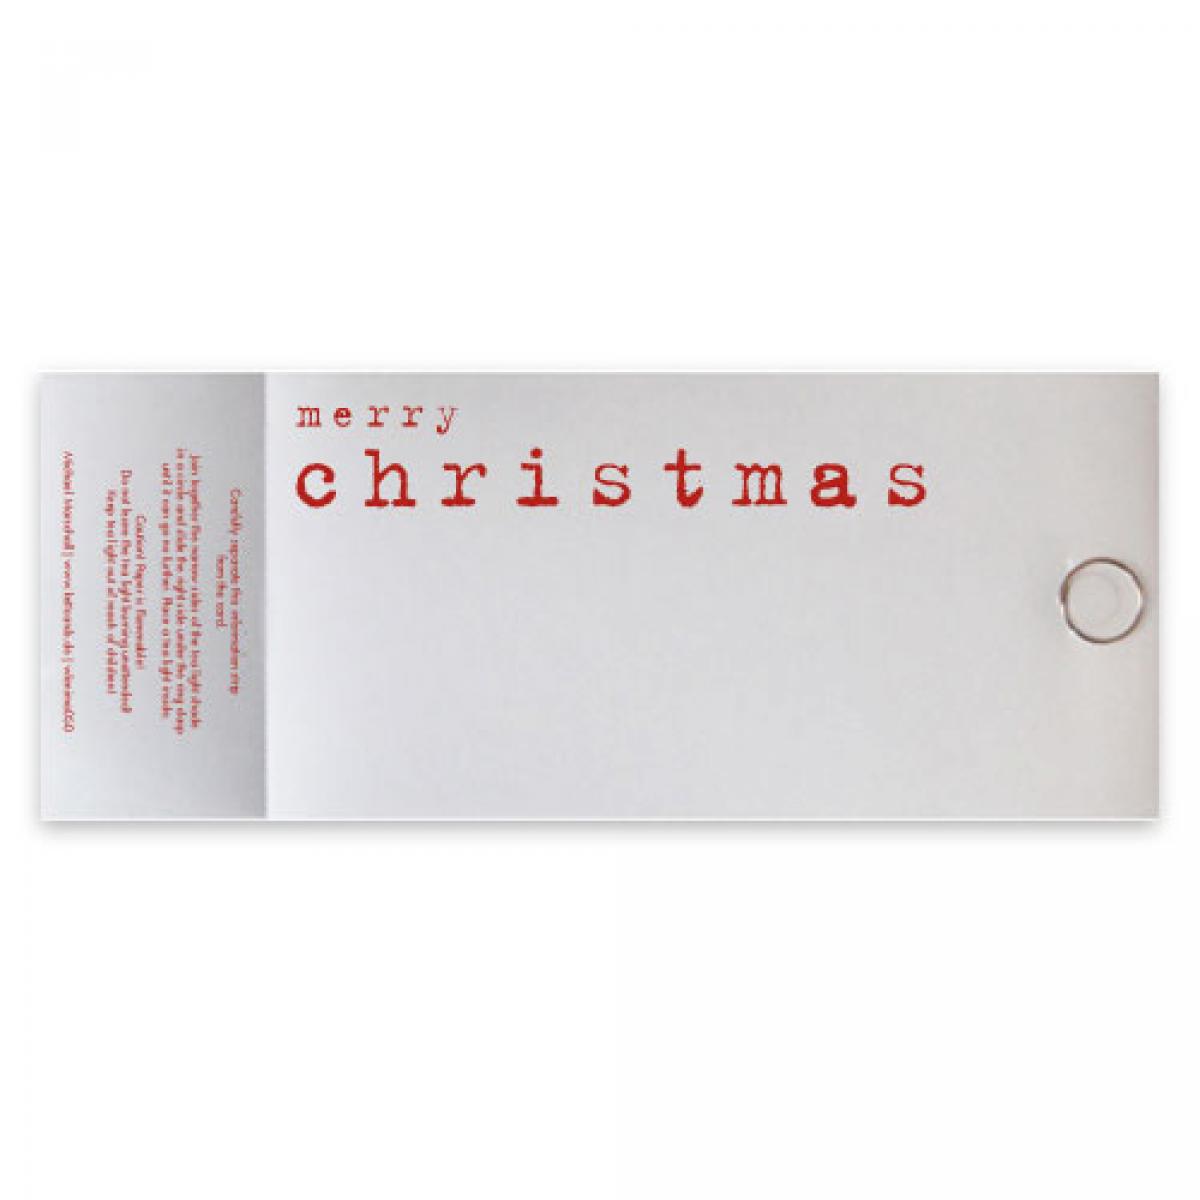 Christmas Cards for a Tealight Candle: merry christmas